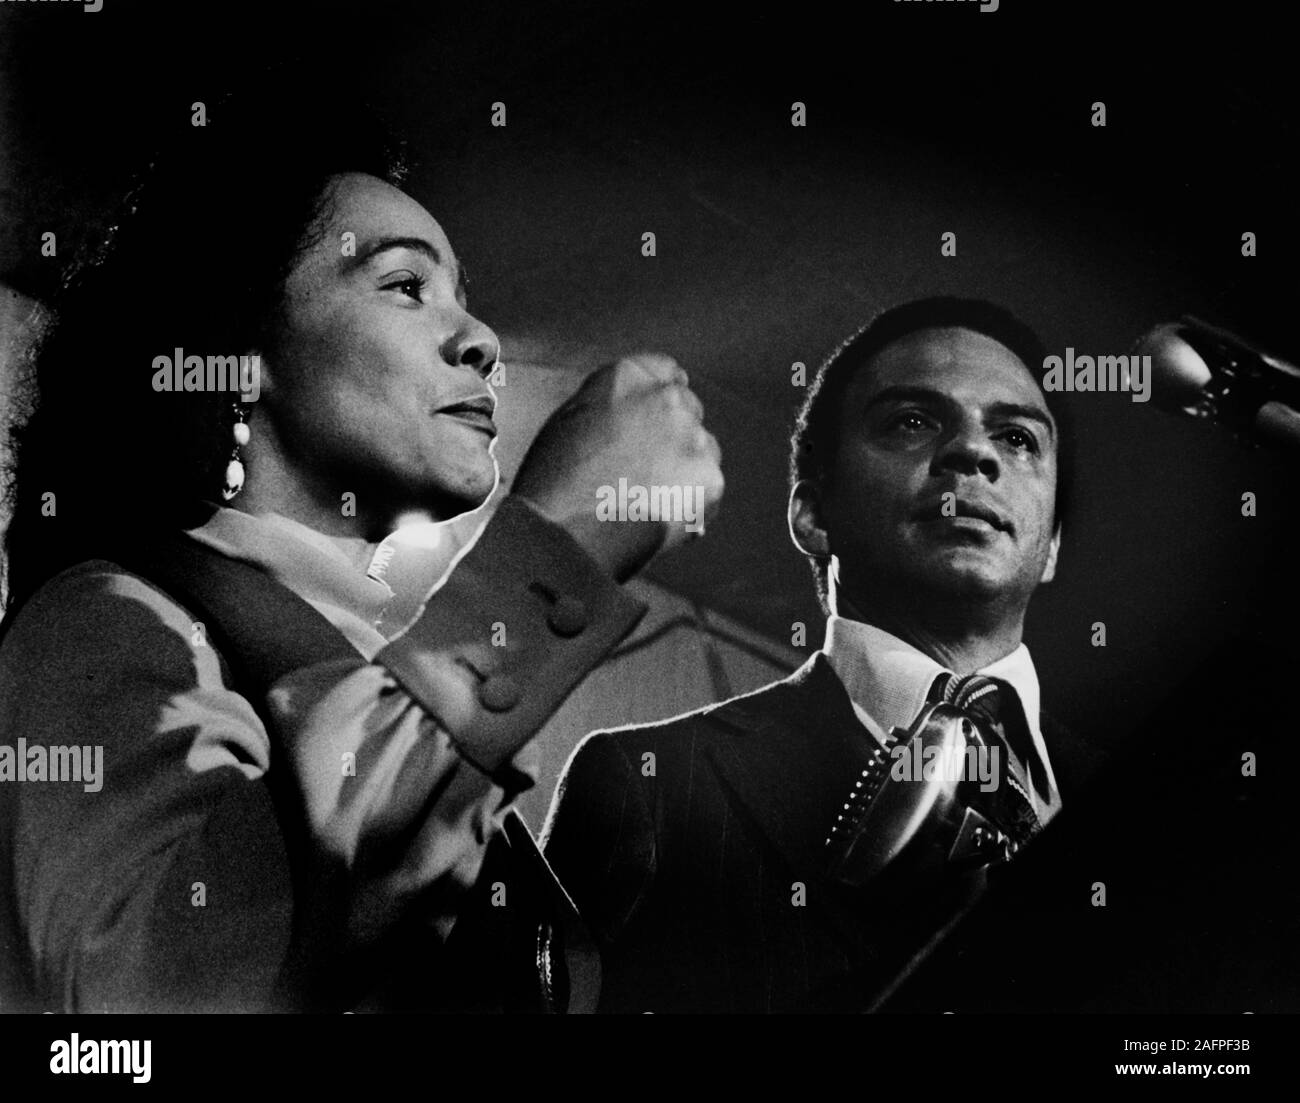 Coretta Scott King, widow of the slain civil rights leader Dr. Martin Luther King, Jr., stands with Andrew Young as he sheds a tear as he concedes defeat in his first run for the Georgia 5th District Congressional race on election night 1970. Young's longtime friend and lieutenant to Martin Luther King, Jr. - To license this image, click on the shopping cart below - Stock Photo